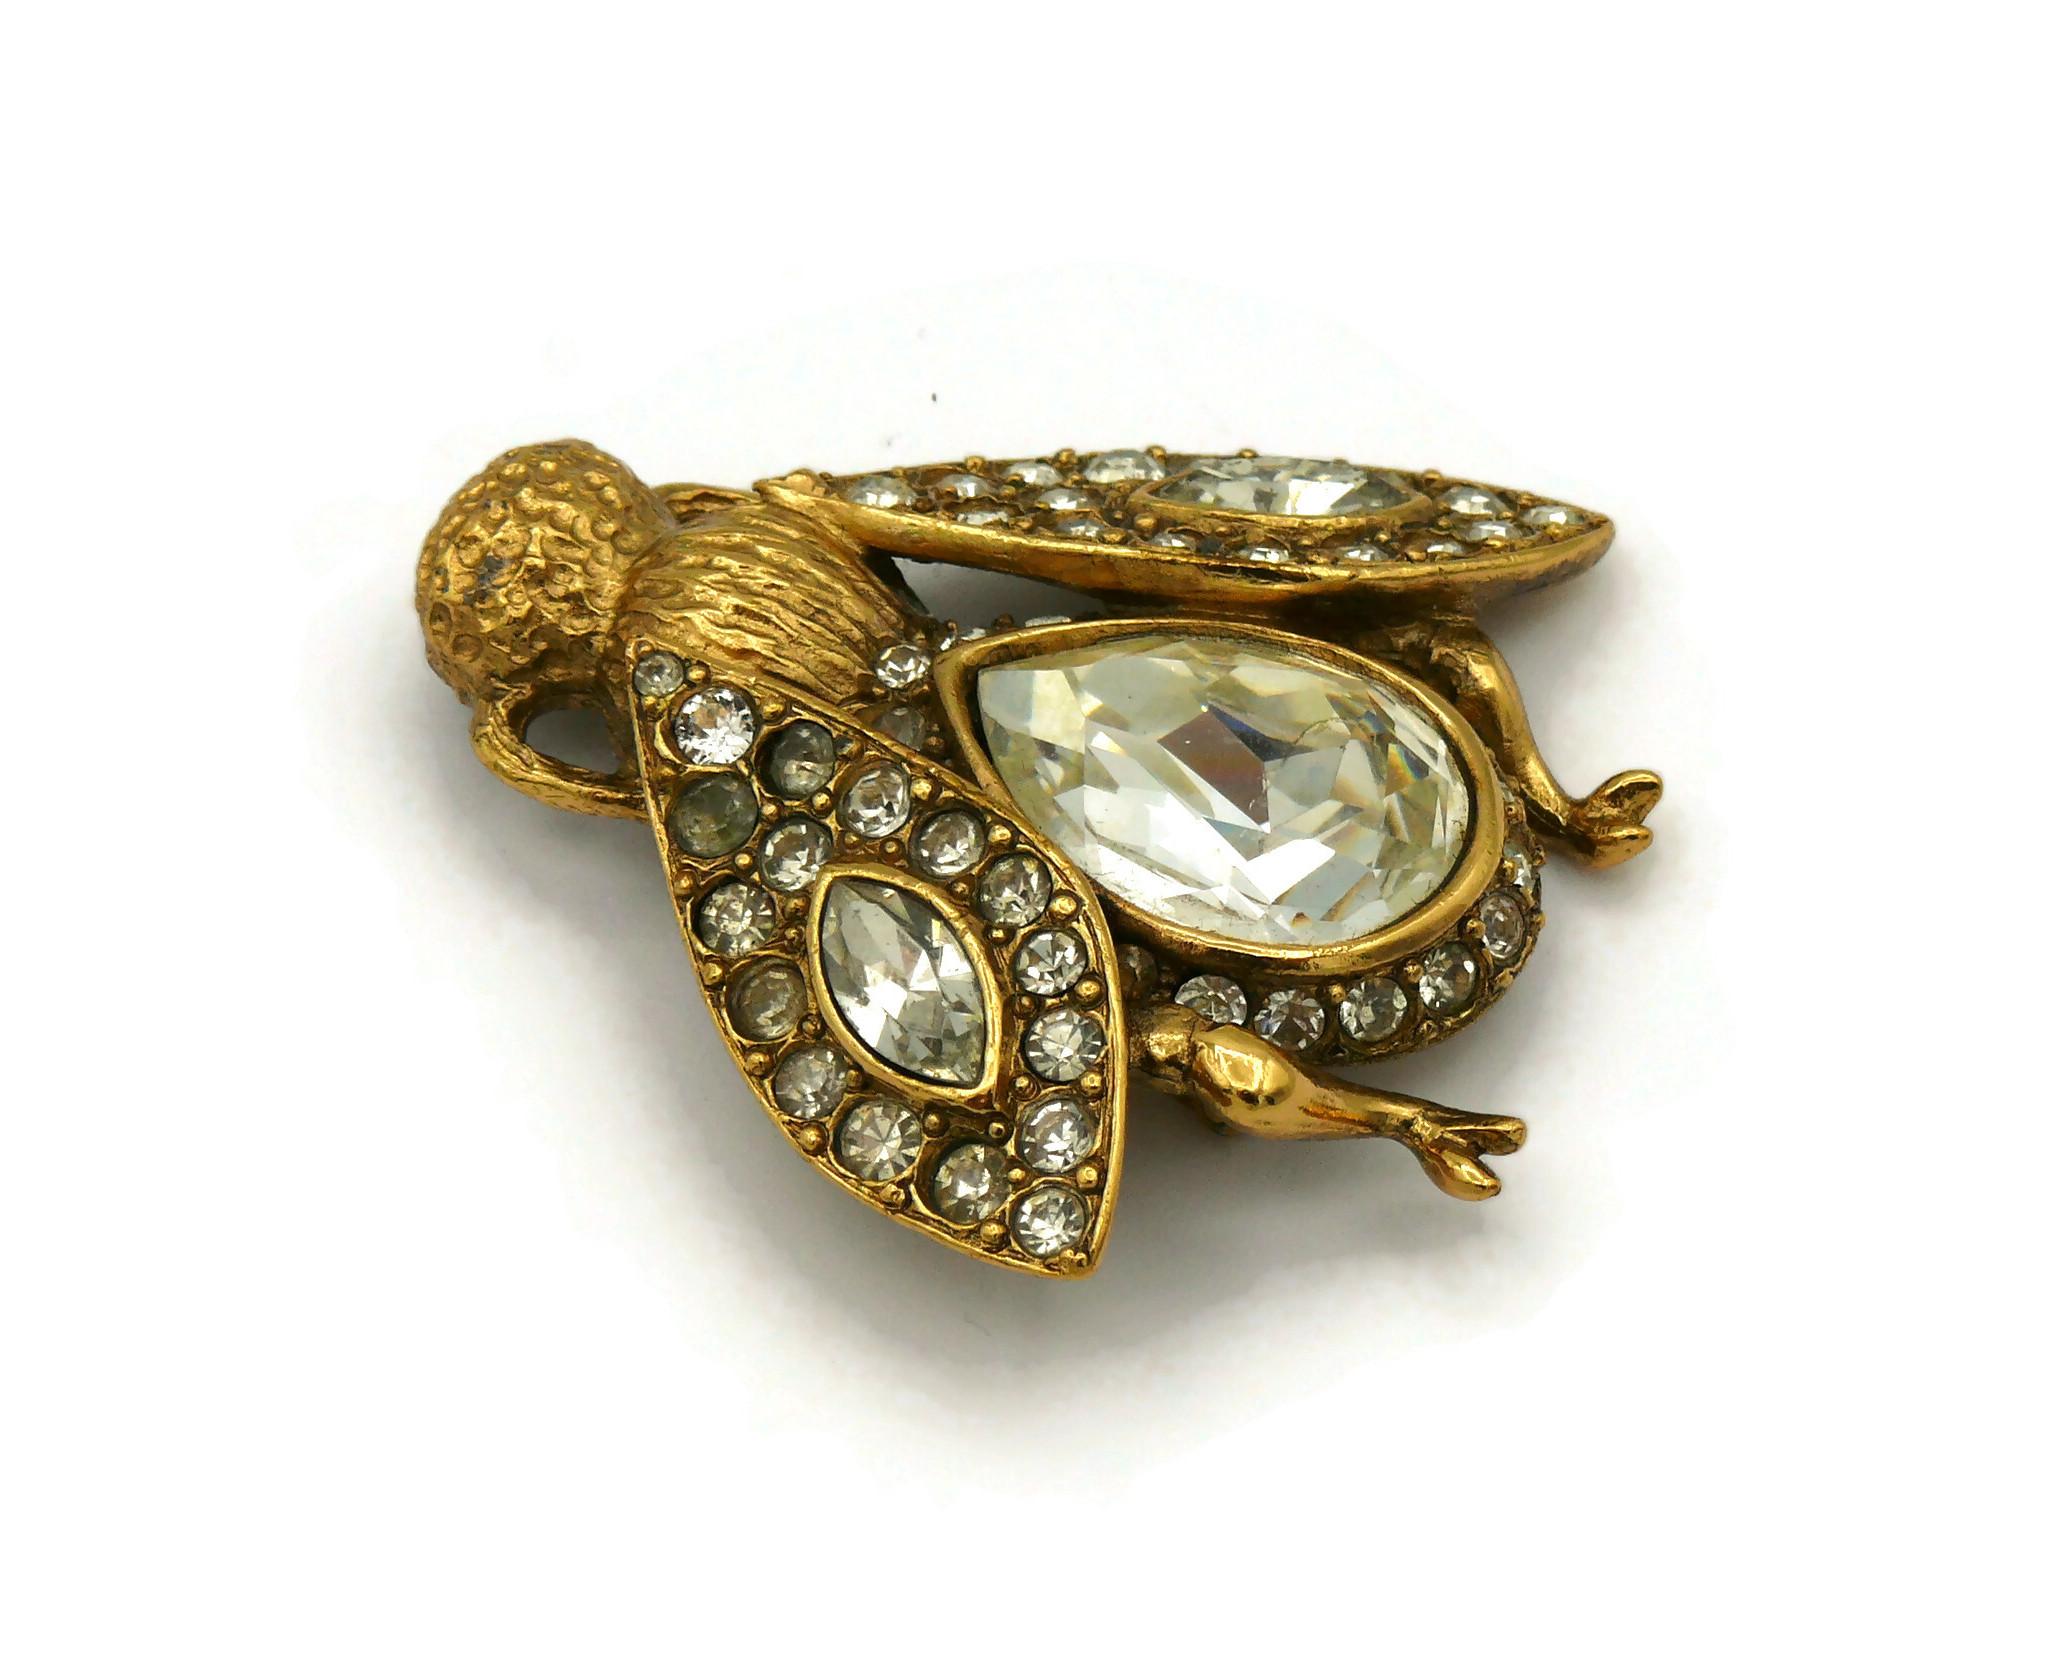 CHRISTIAN DIOR Vintage Iconic Jewelled Bee Brooch 2